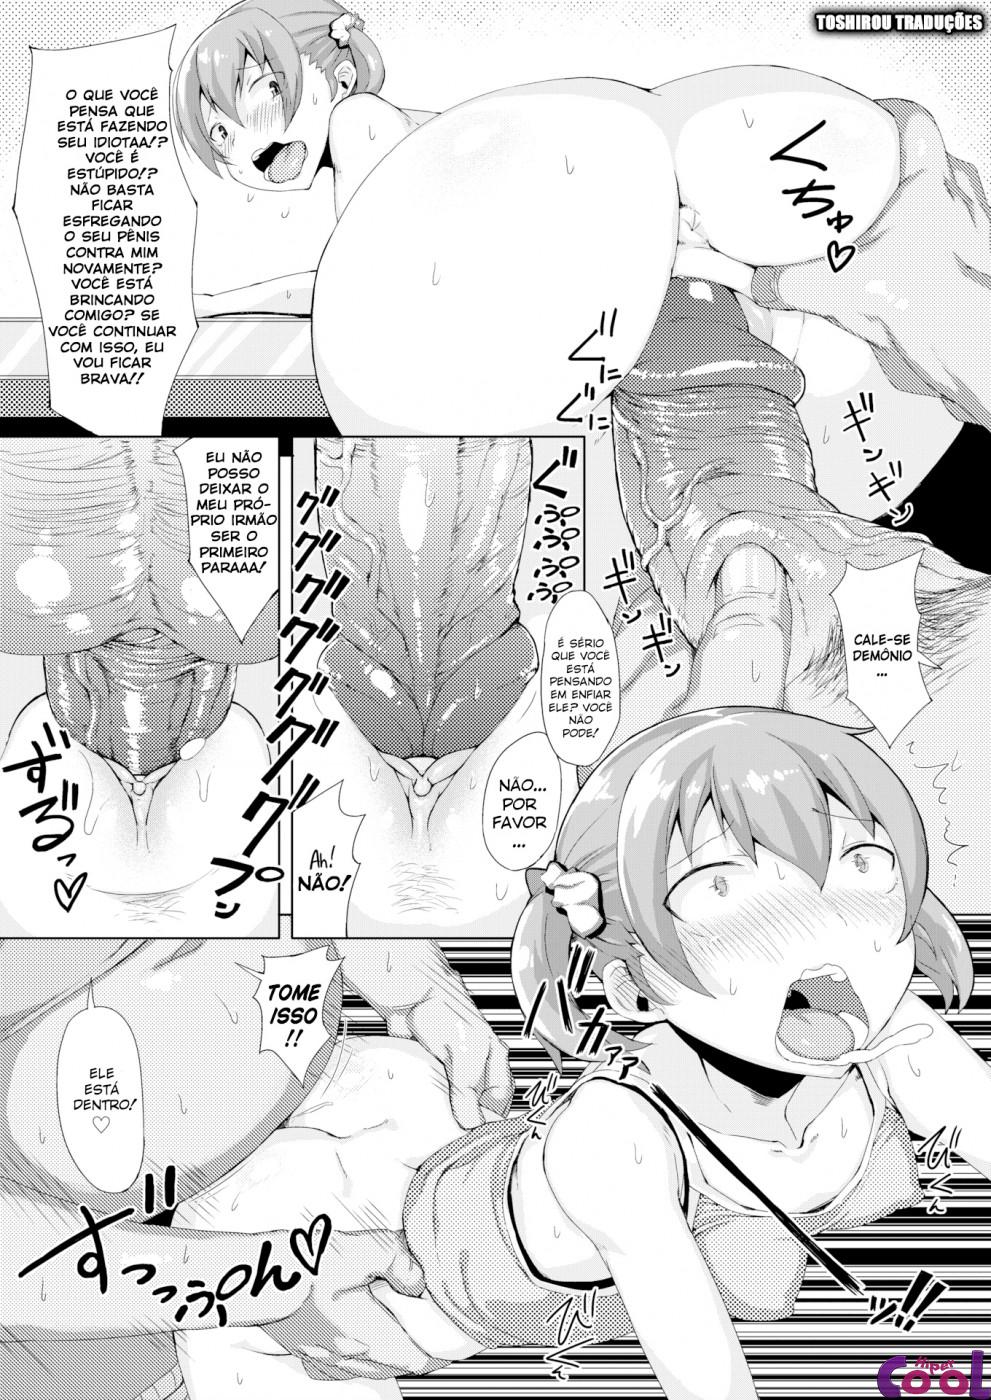 lenient-little-sister-chapter-01-page-12.jpg